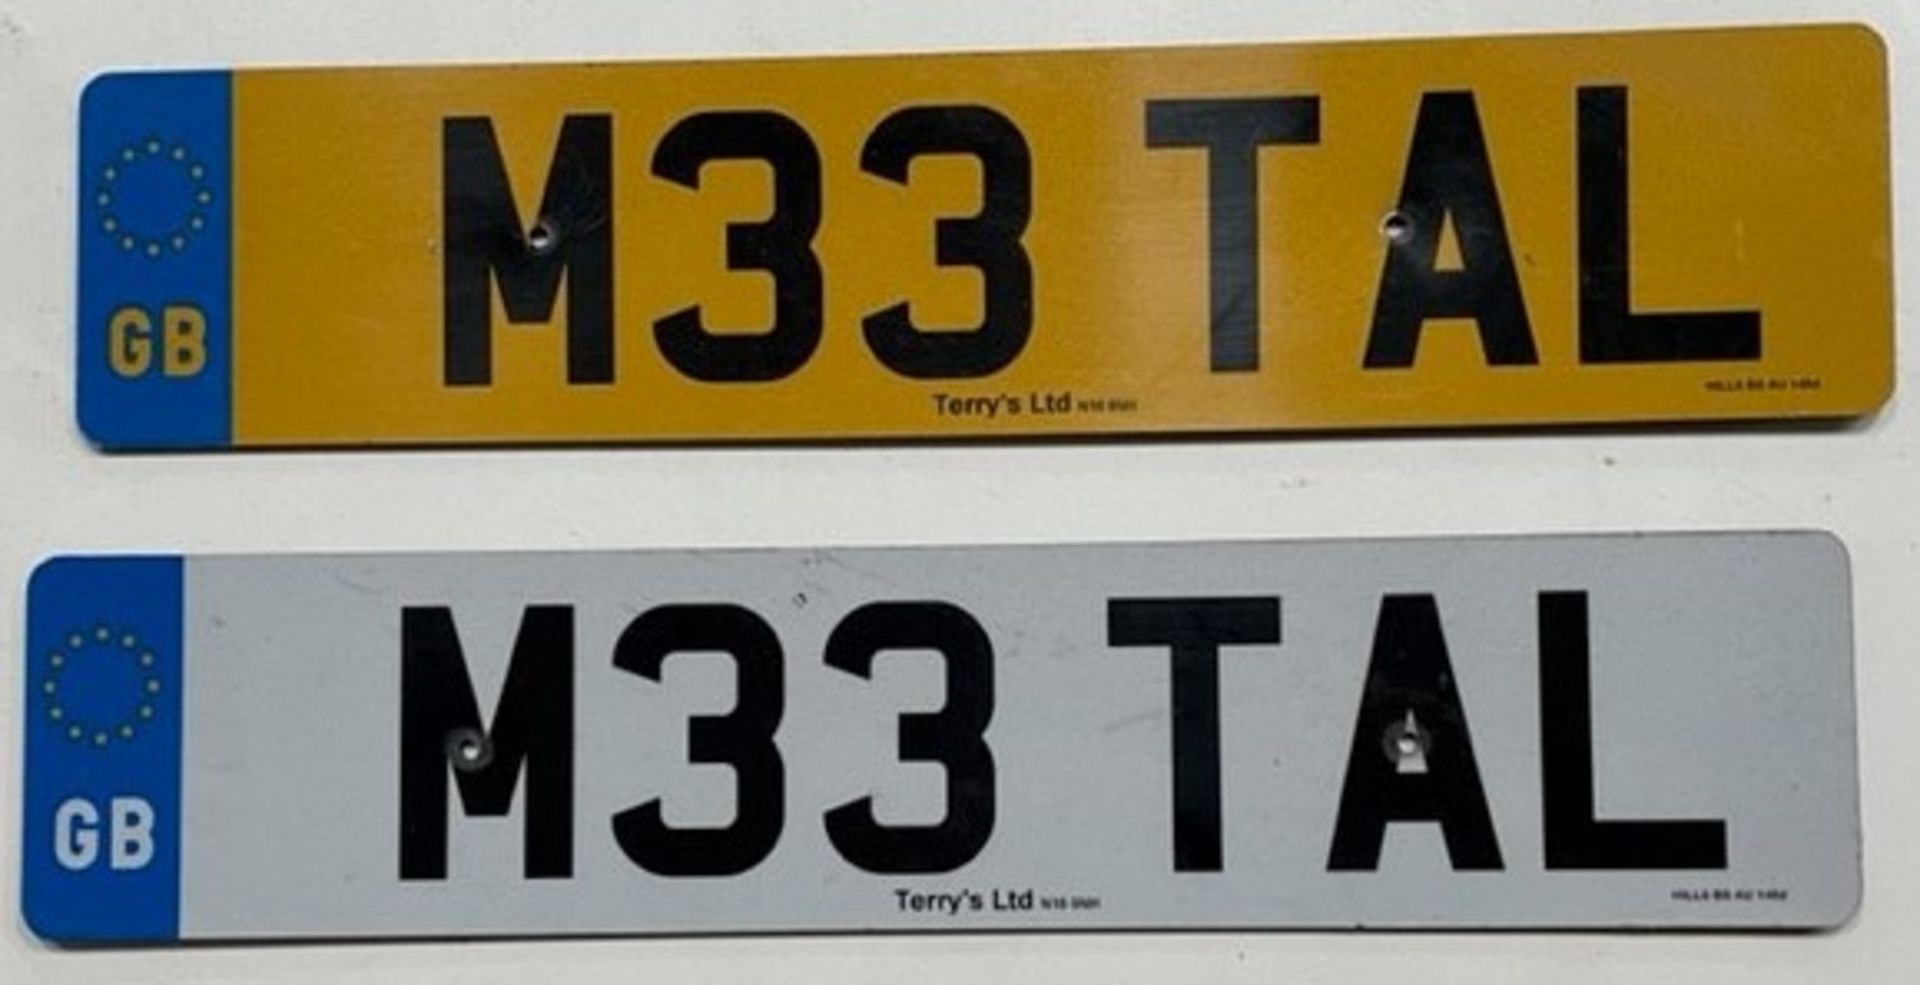 Cherished Registration Plate ‘’M33 TAL’’ on Retention Certificate (Location: Stockport. Please Refer